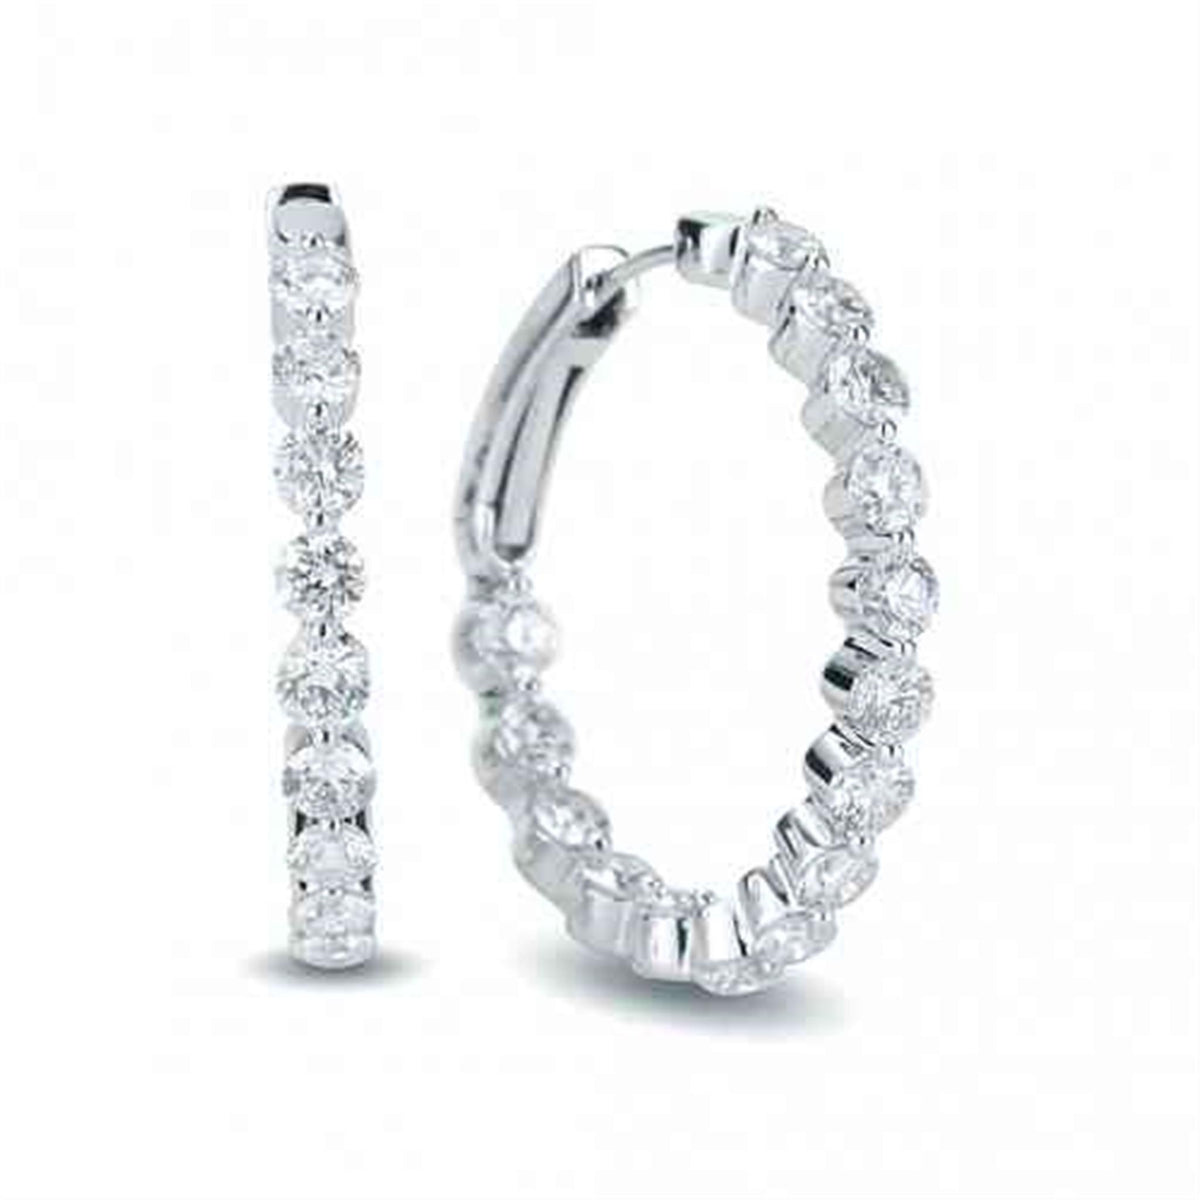 18Kt White Gold Round Hoop Earrings 4.01cttw Natural Diamonds